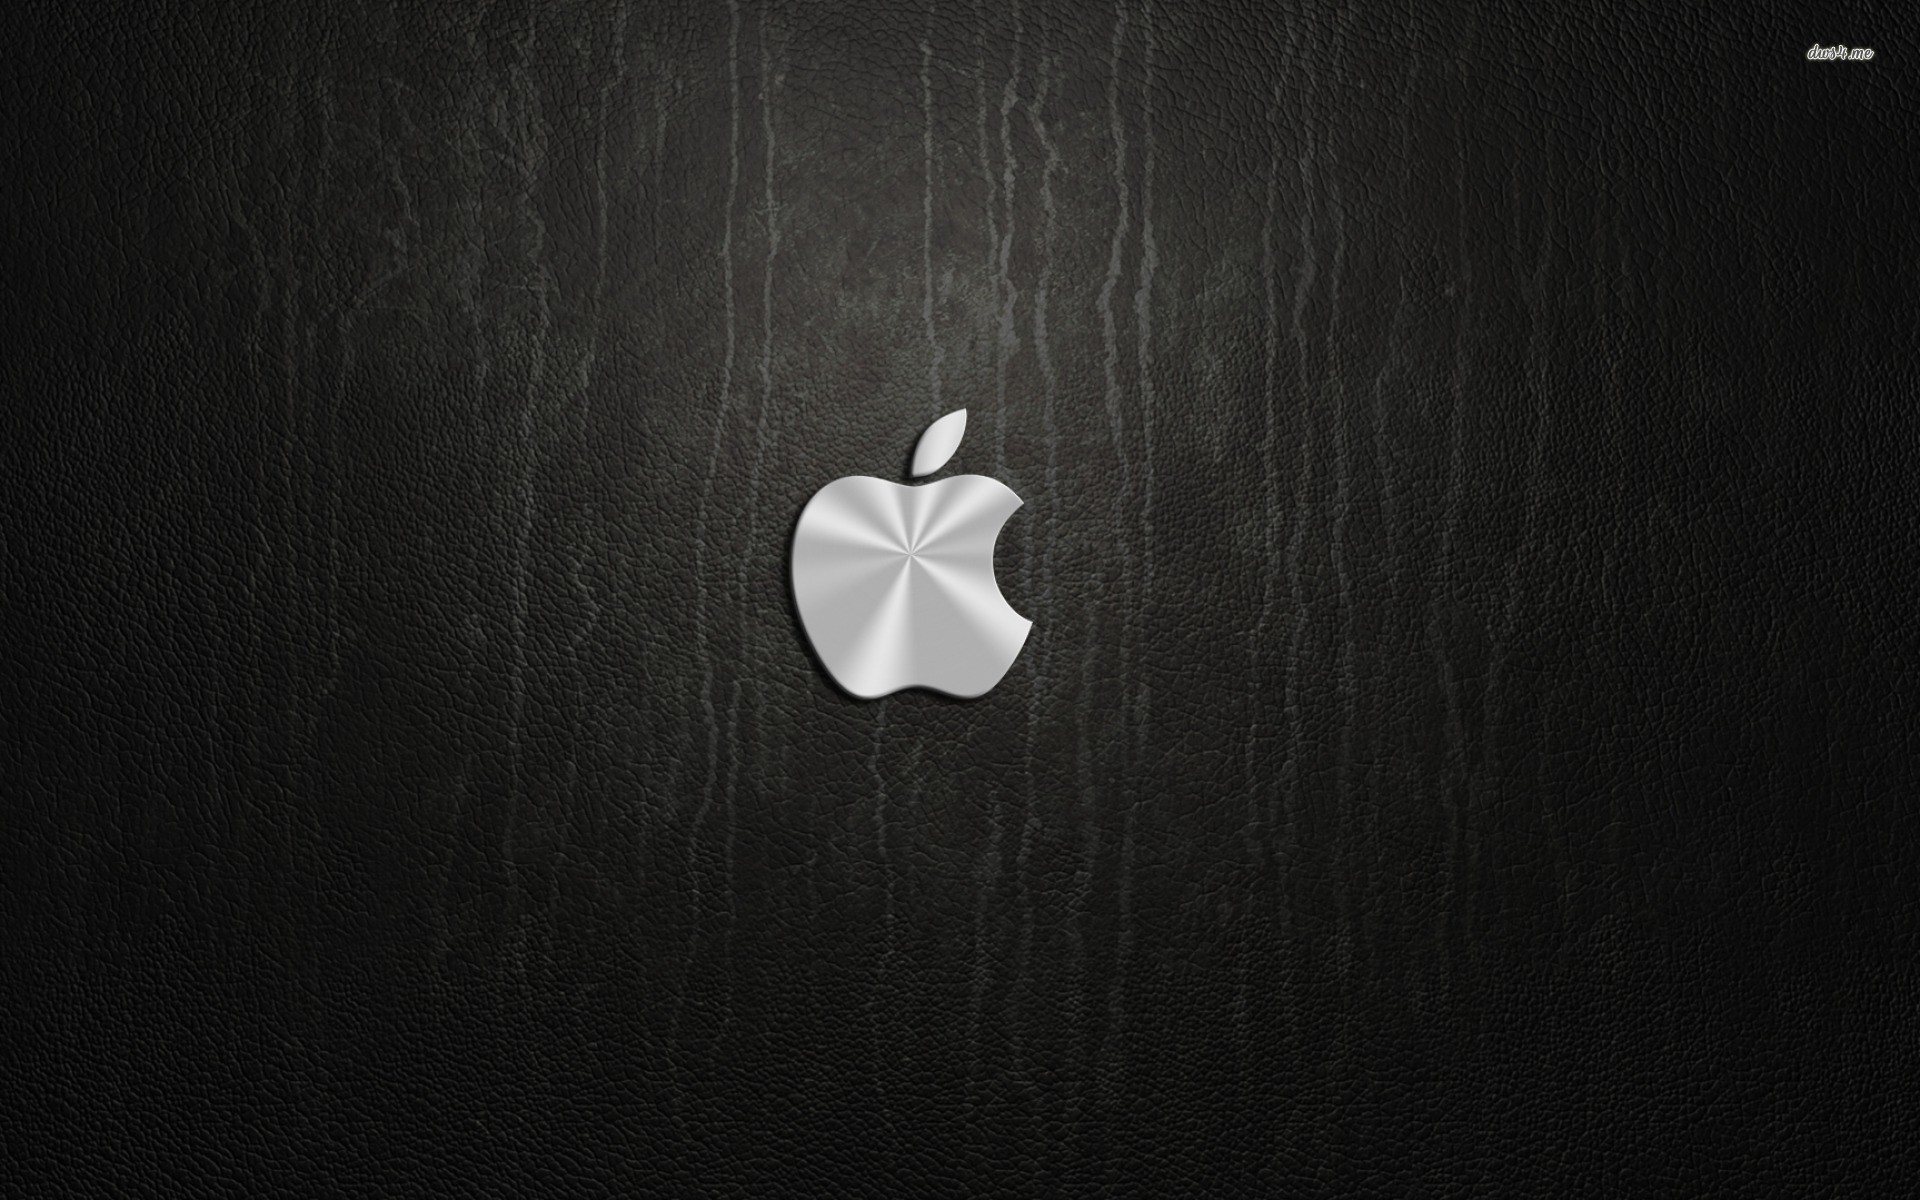 1920x1200 ... Silver Apple on black leather wallpaper  ...